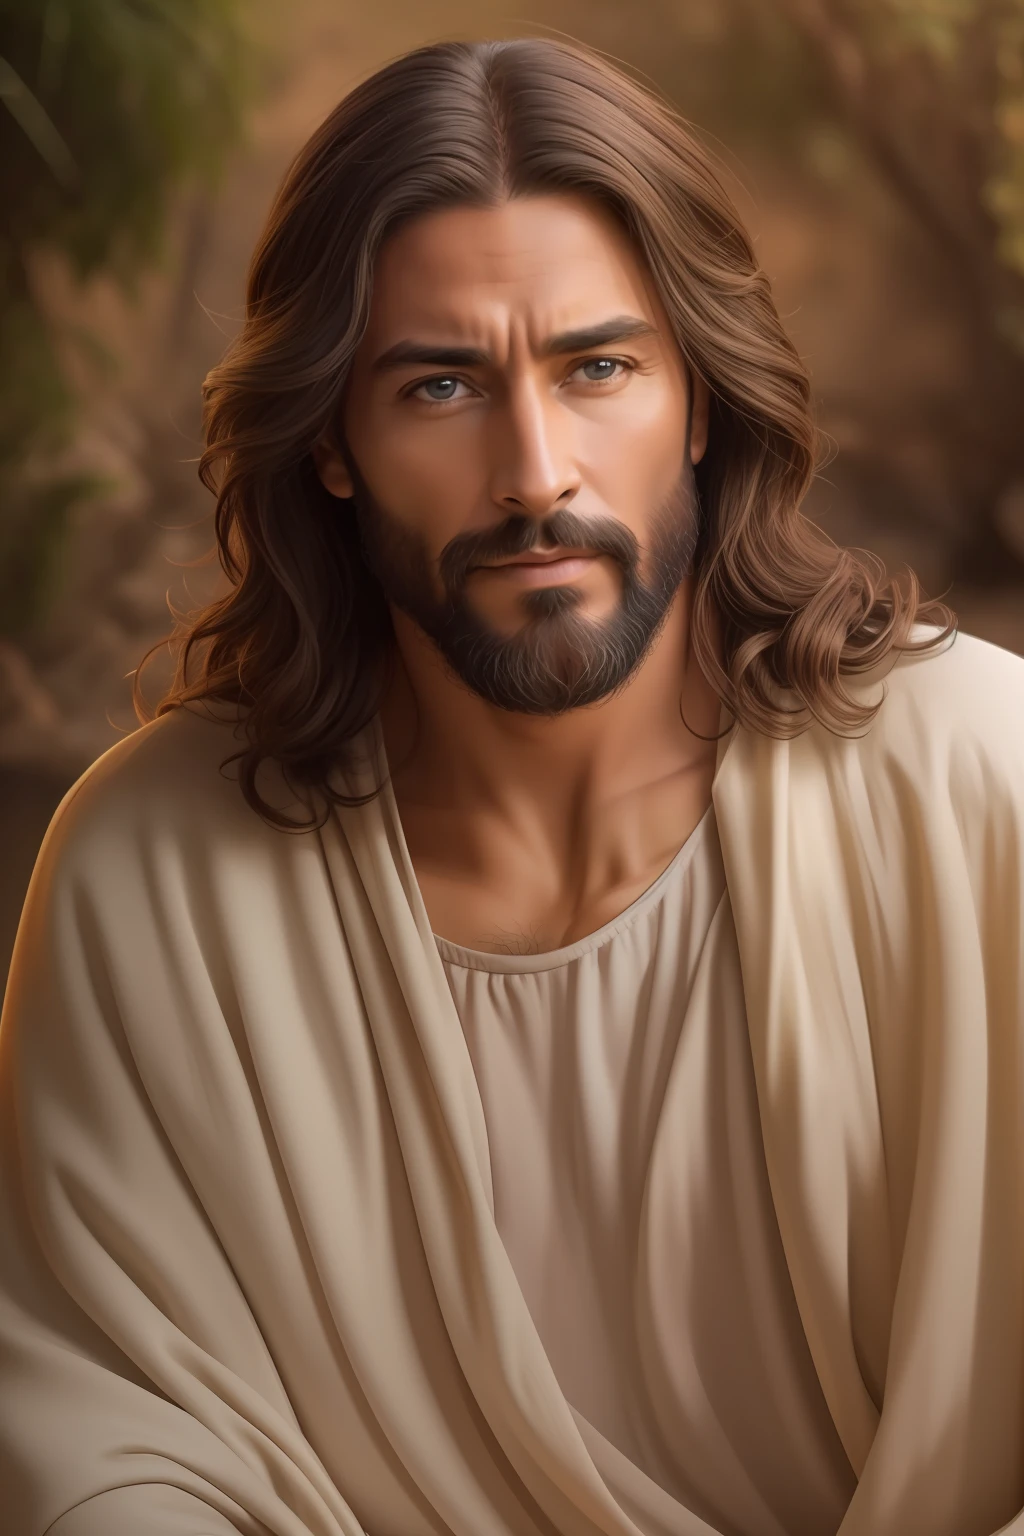 Generate a realistic style image of Jesus, The paradise of celestial background , looking straight ahead .with long brown hair and beard. His eyes are kind and expressive,, ensure the image is high quality and rich in detail, capturing the essence of Jesus , highly detailed skin: 1,2 8k uhd , 20MP, Fujifilm XT3, 80mm